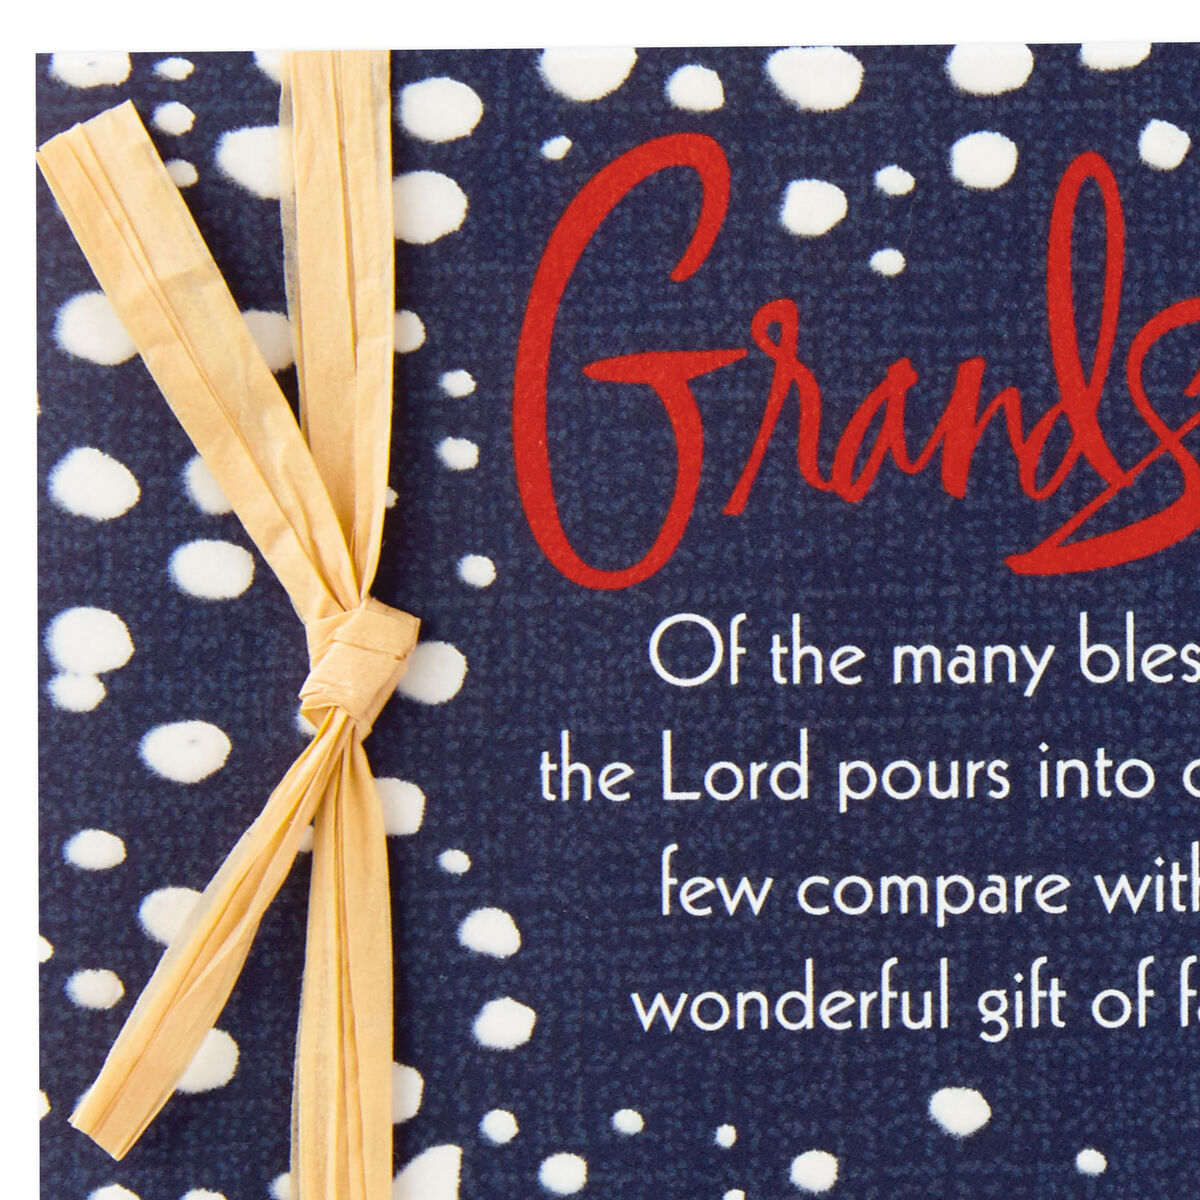 You're a Wonderful Gift Religious Christmas Card for Grandson